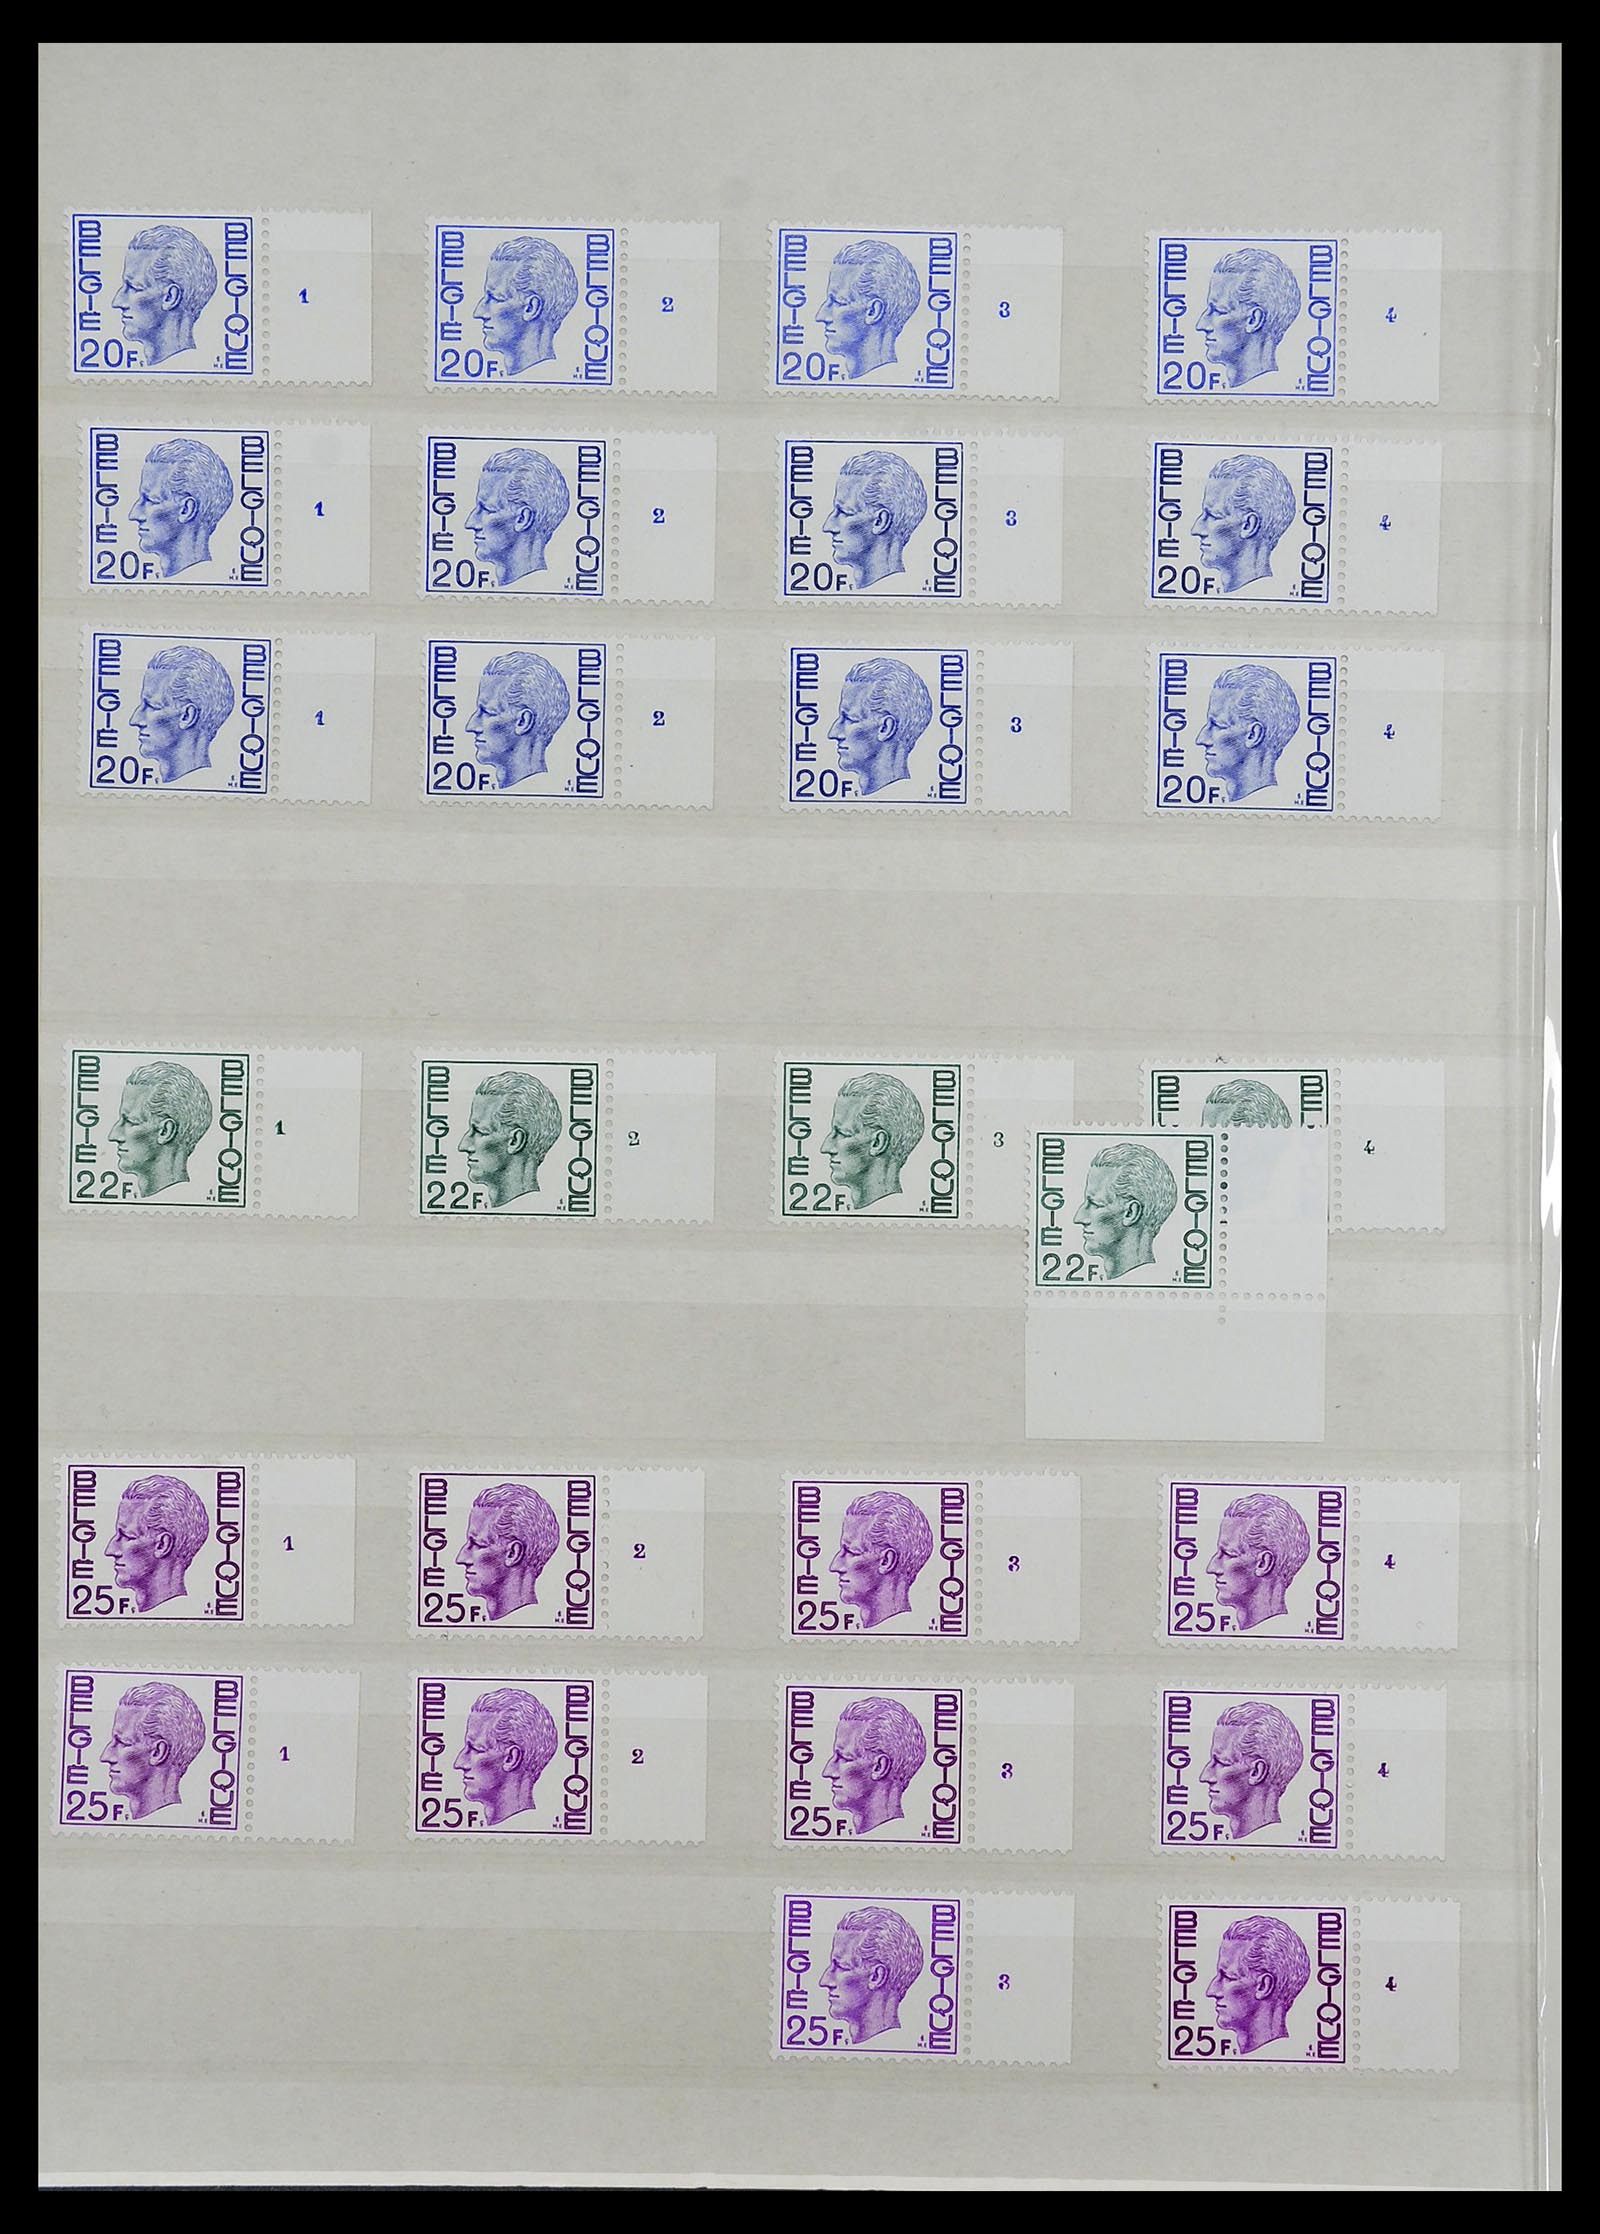 34524 088 - Stamp Collection 34524 Belgium plate and etching numbers 1963-1990.